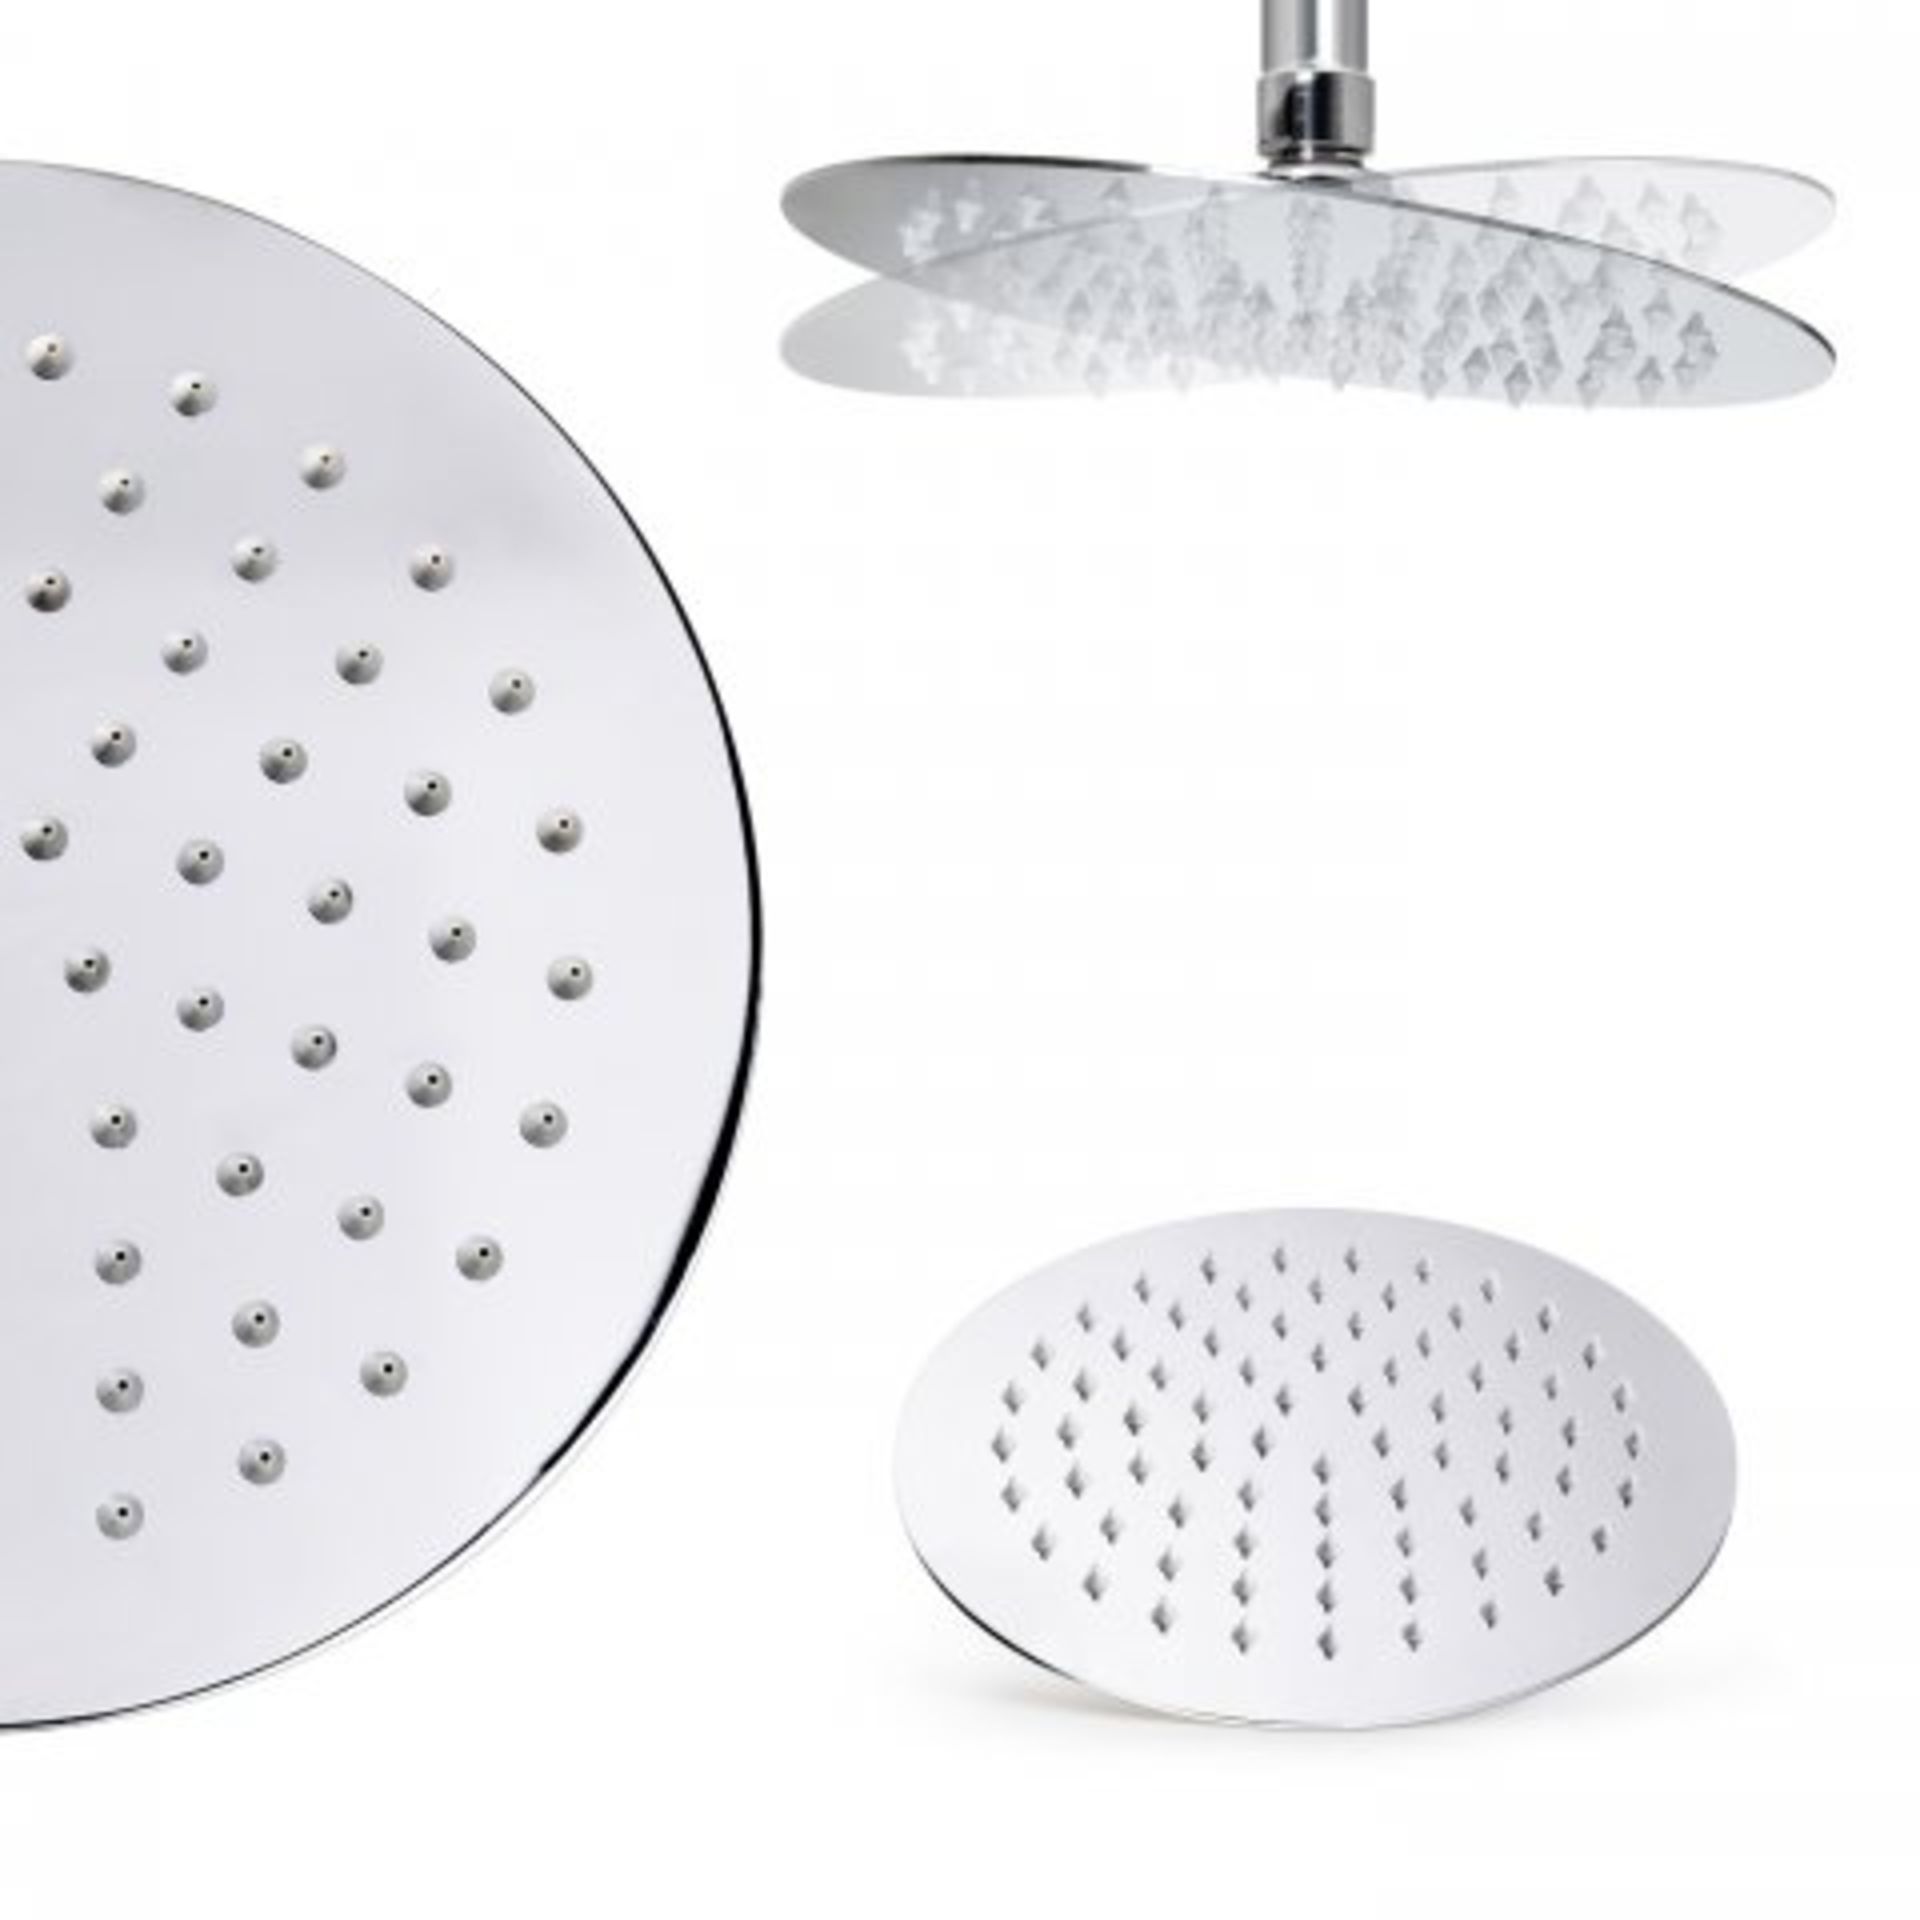 (AA51) Stainless Steel 200mm Round Shower Head Look no further than our lightweight 200mm round - Image 3 of 3